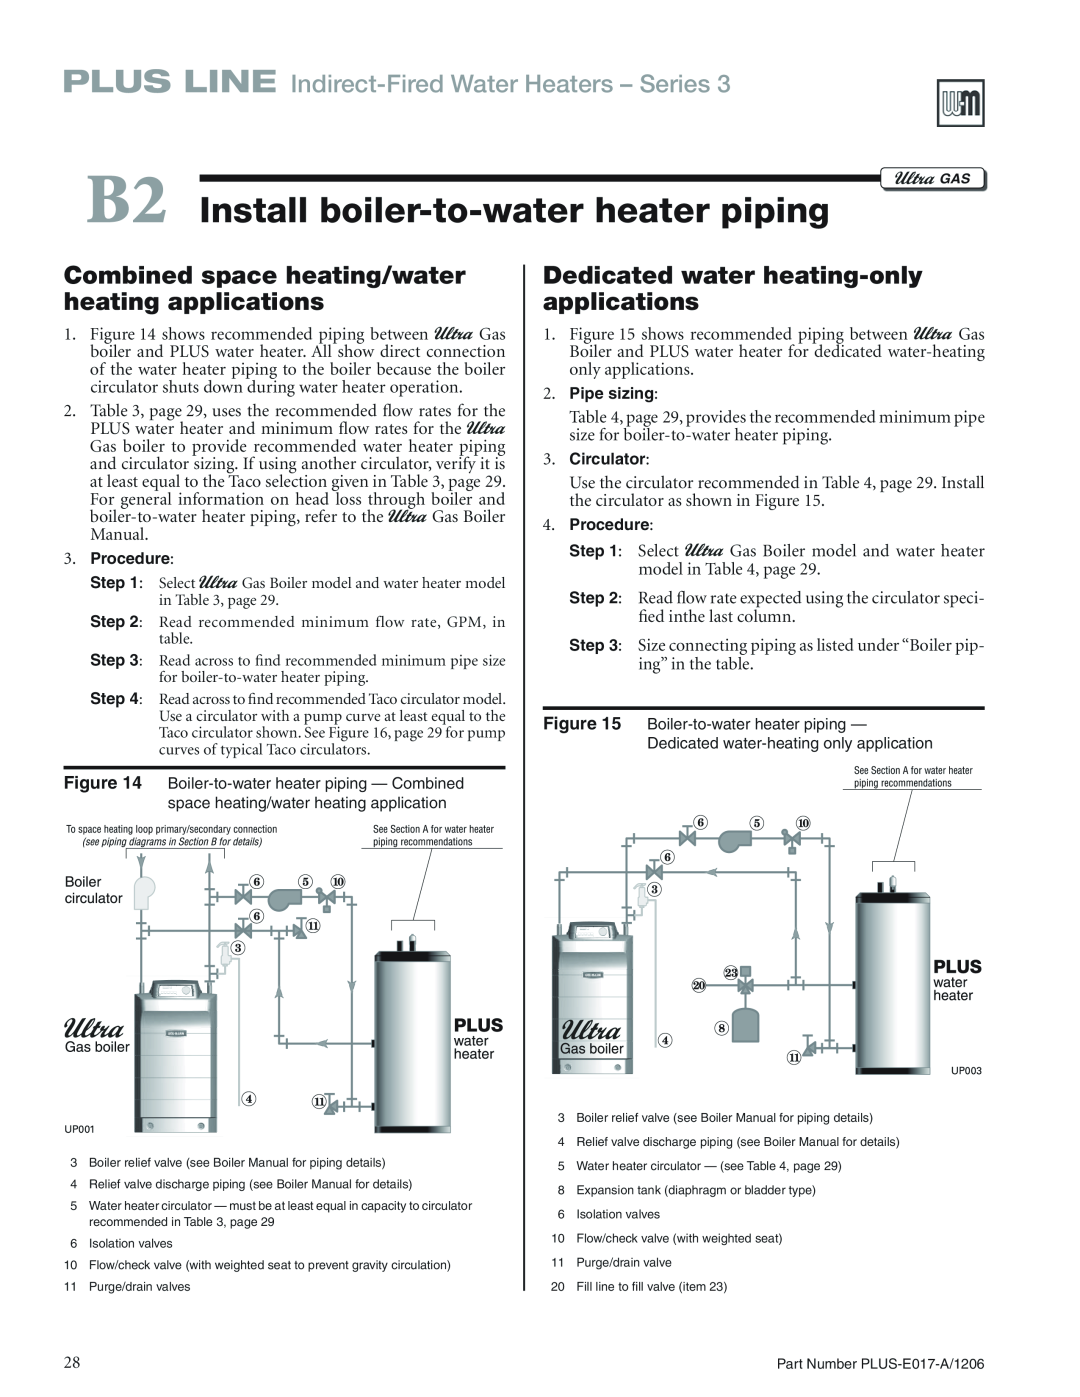 Weil-McLain PLUS-E017-A/1206 manual Install boiler-to-waterheater piping, Combined space heating/water heating applications 